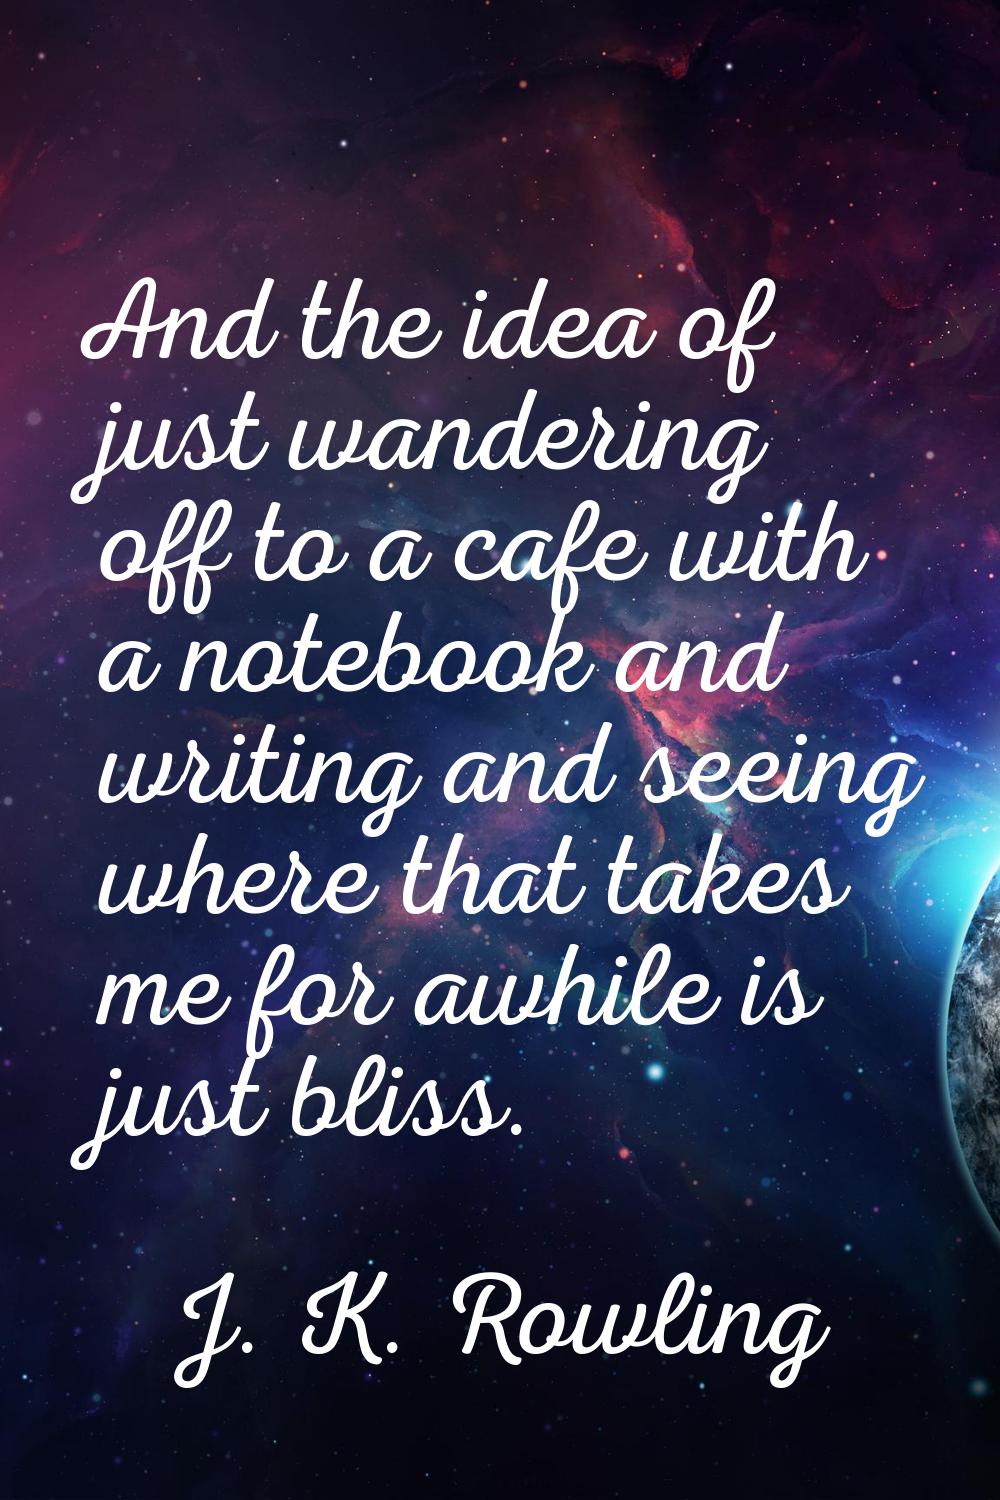 And the idea of just wandering off to a cafe with a notebook and writing and seeing where that take